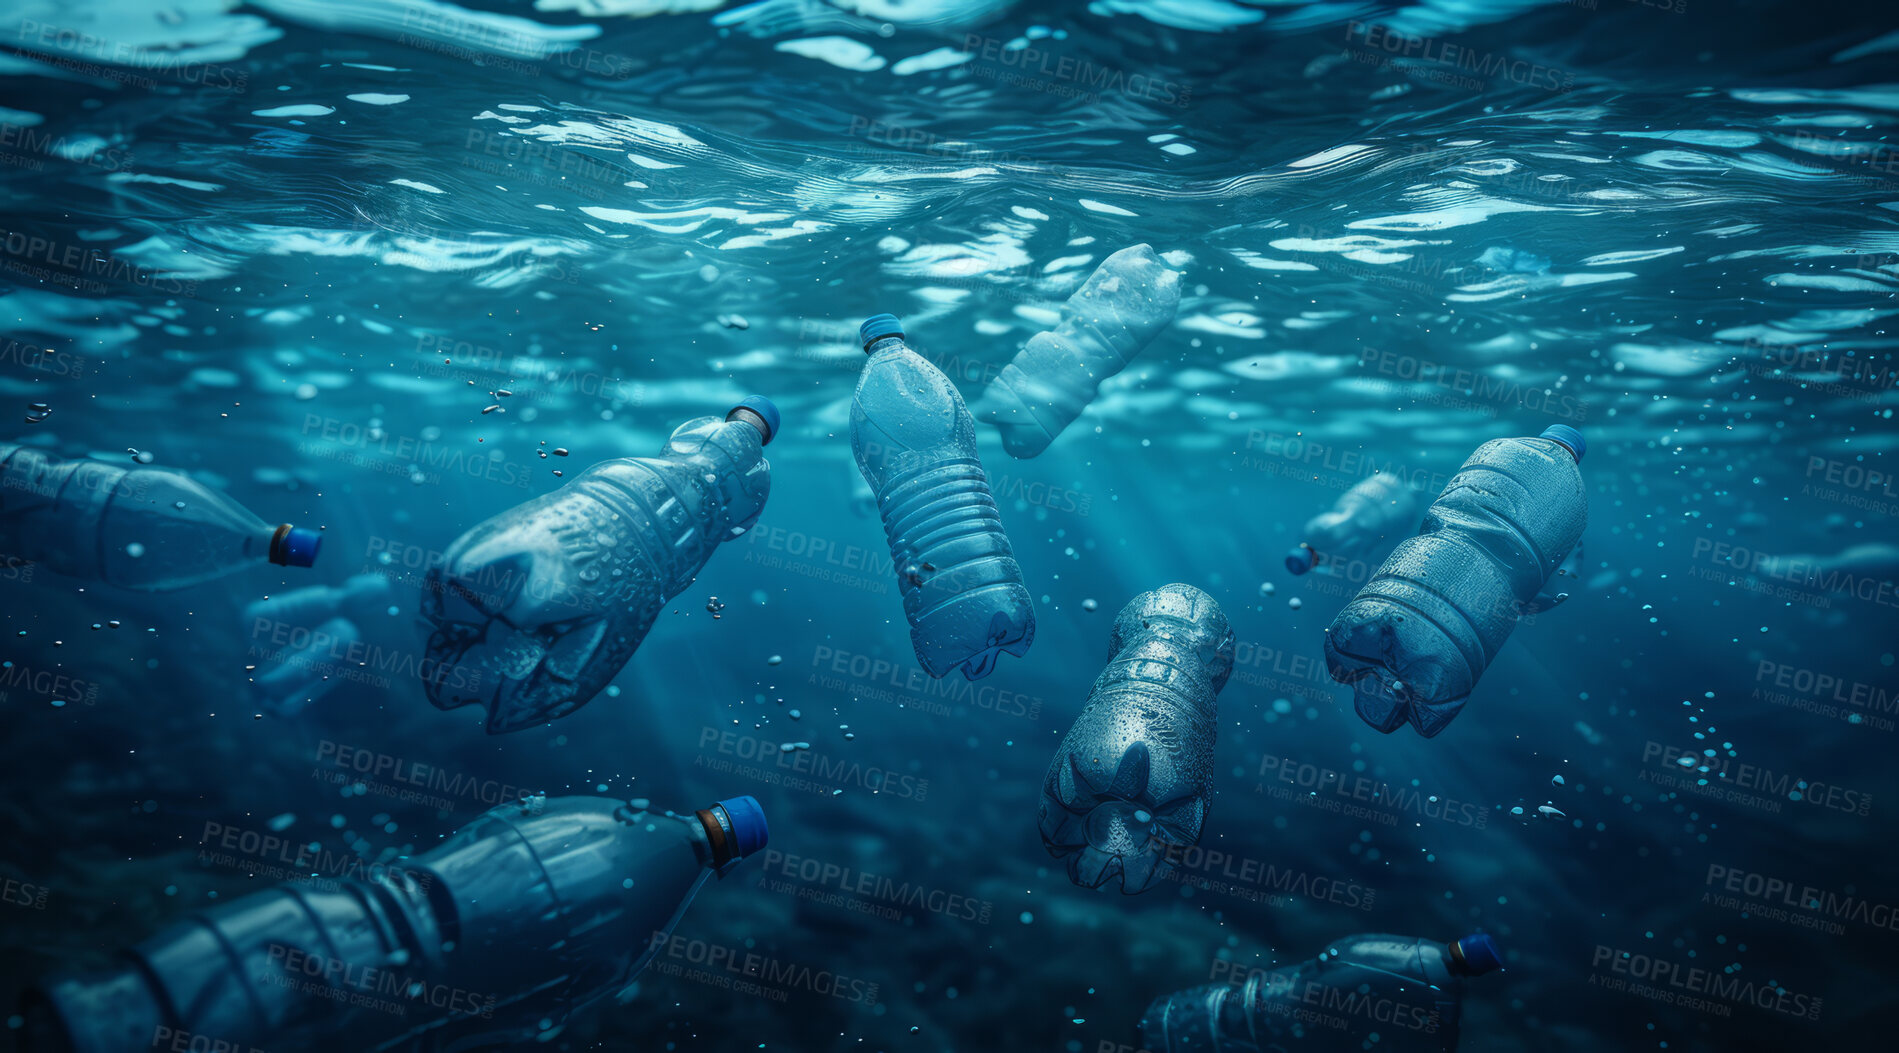 Buy stock photo Ocean, sea and bottles floating underwater in dirty water for awareness background and poster design. Blue, wildlife and nature scene with plastic for impact of pollution, environment and waste